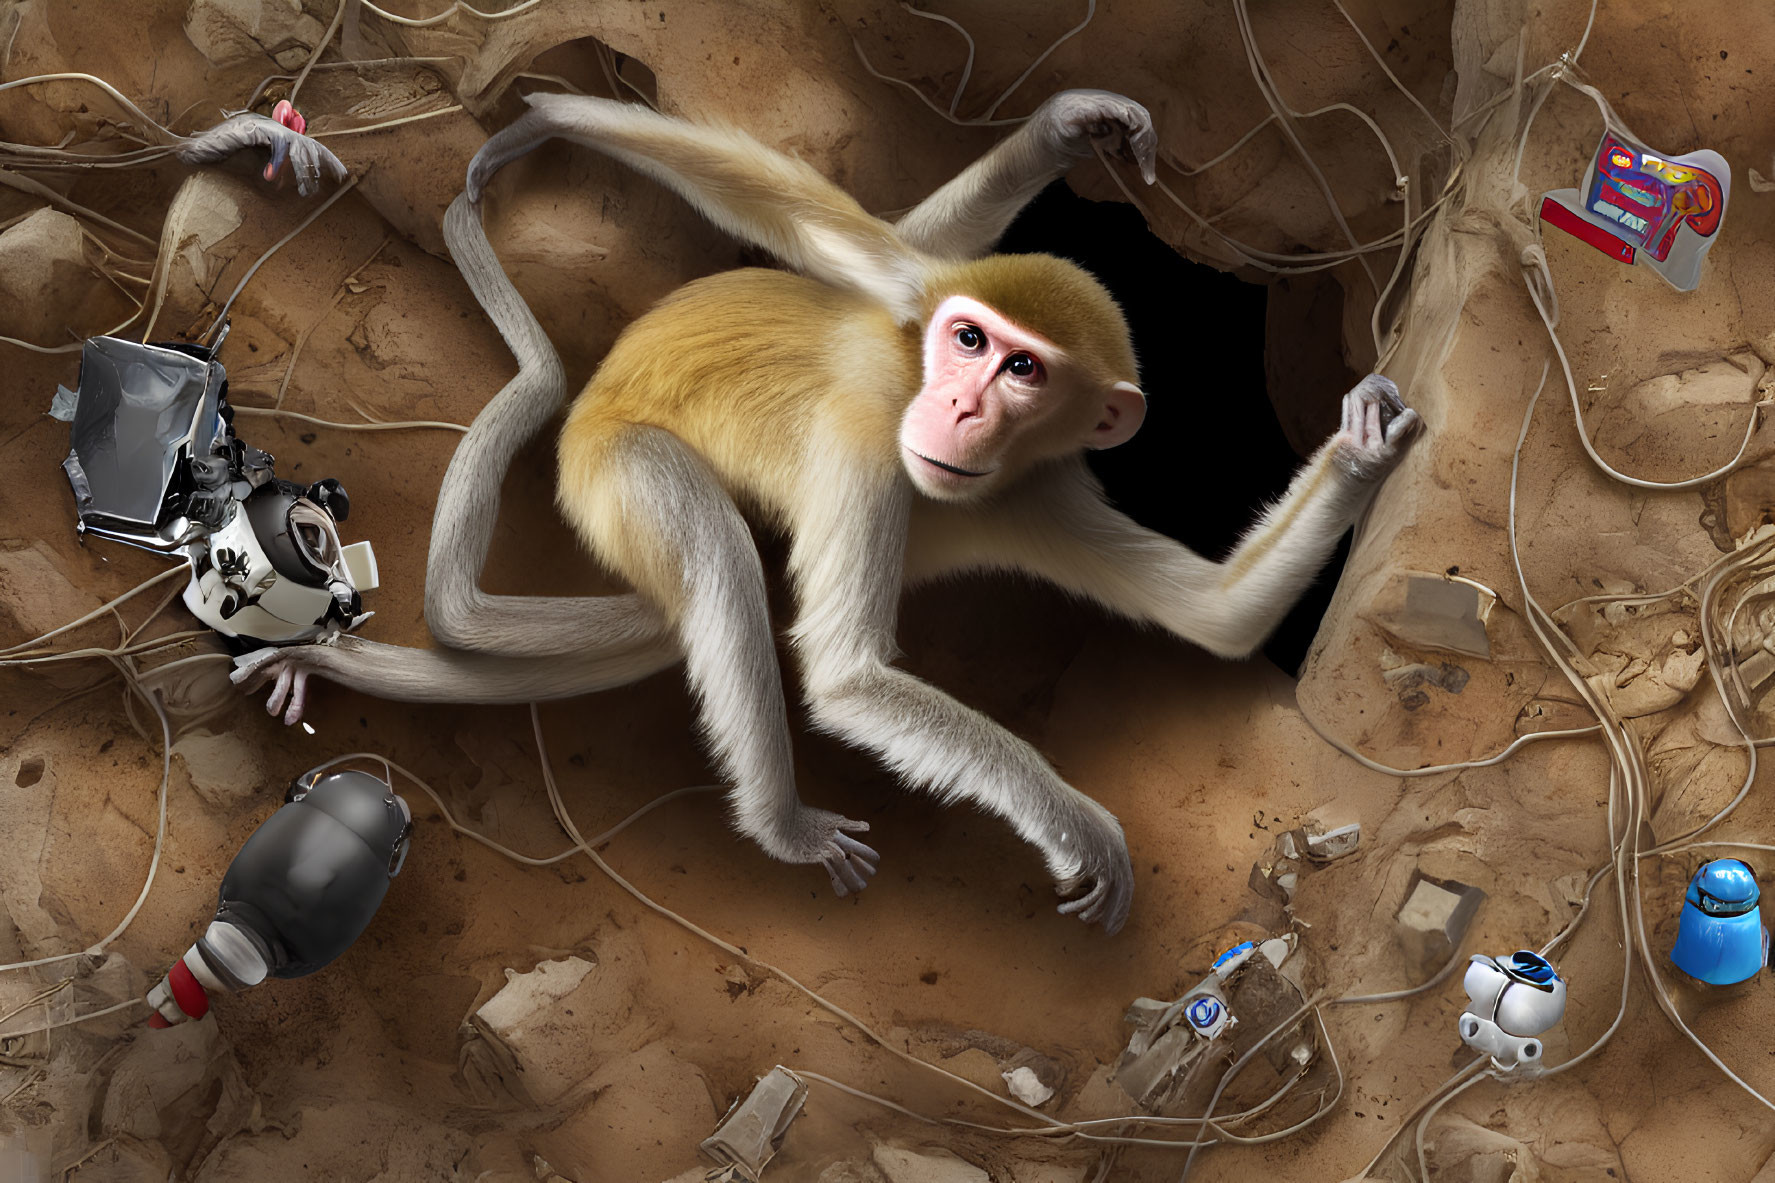 Monkey with space-themed toys and objects in moonscape setting